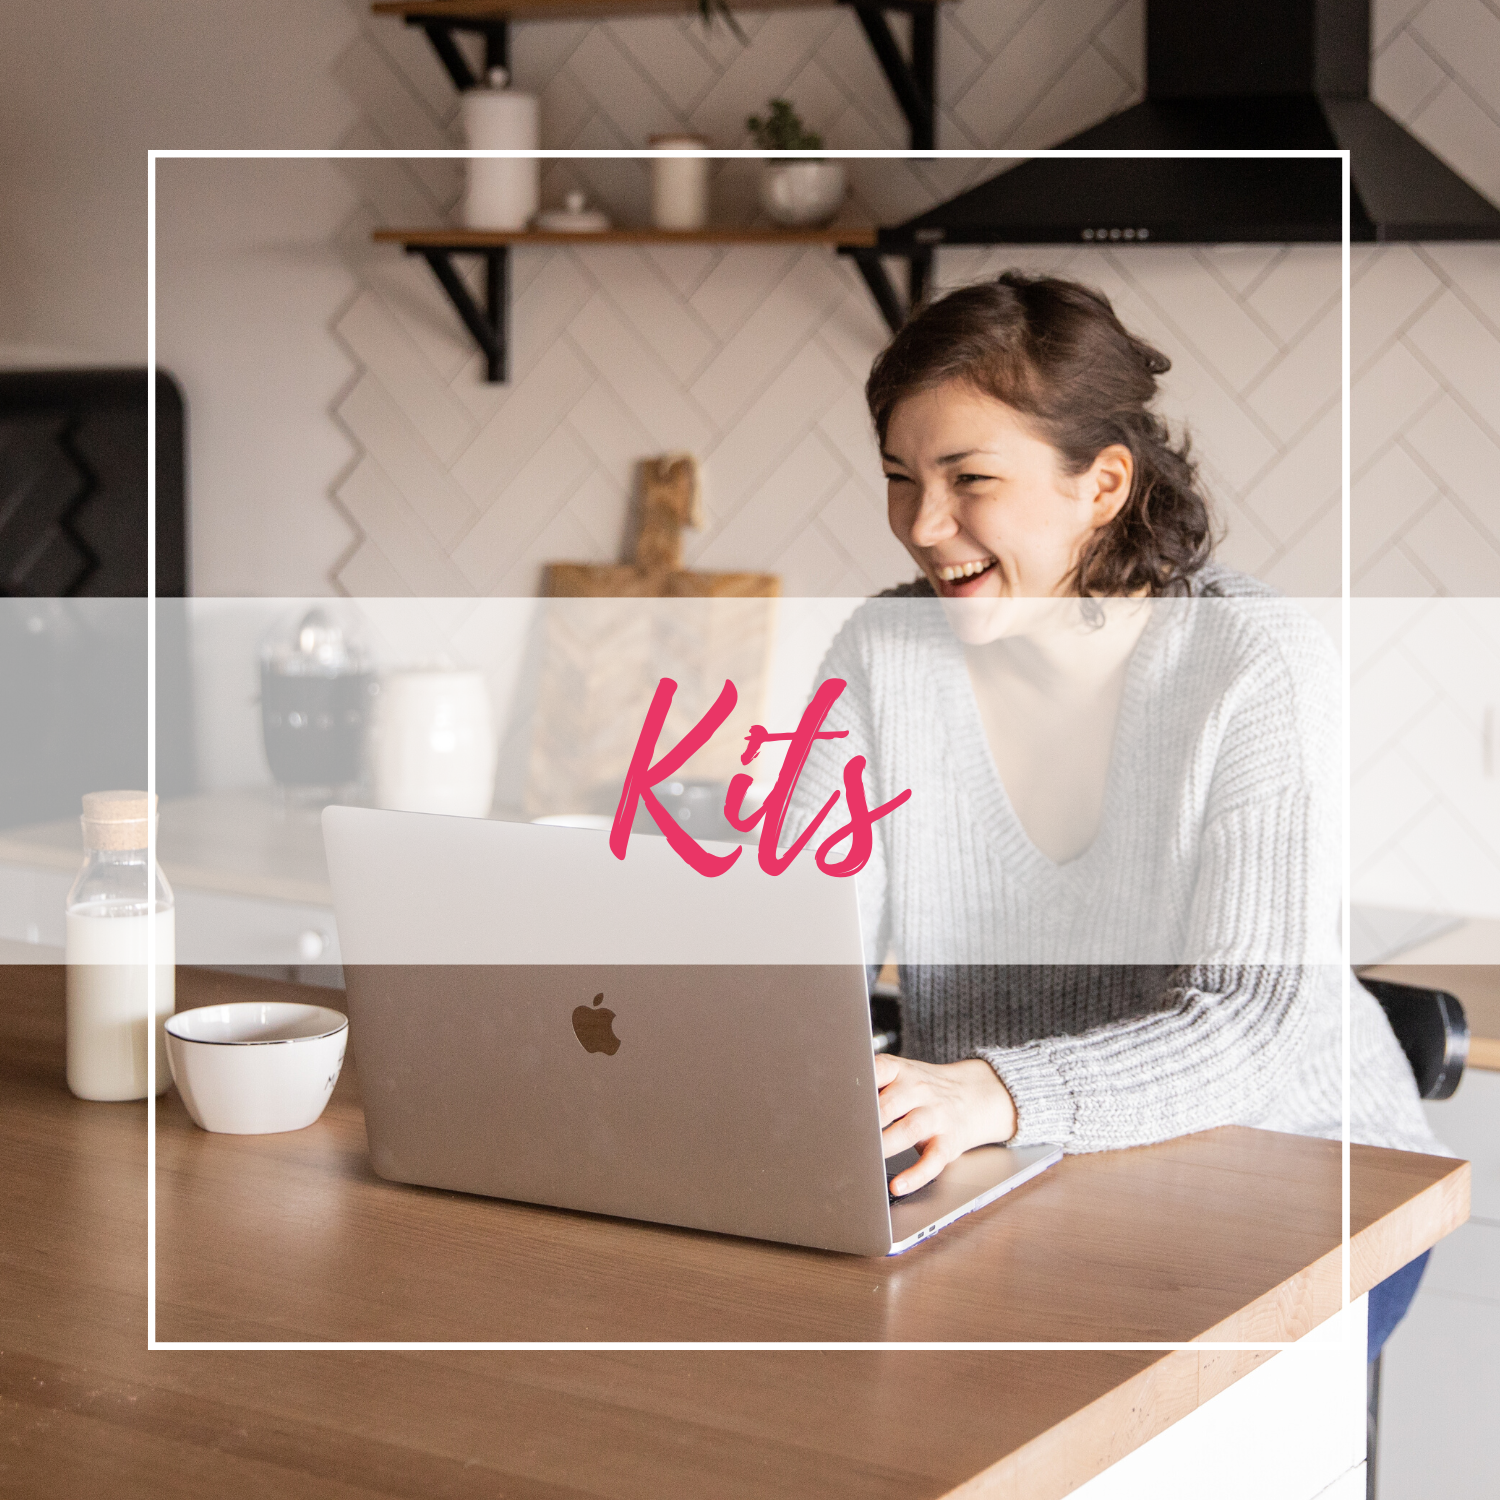 Kits to help you achieve your goals